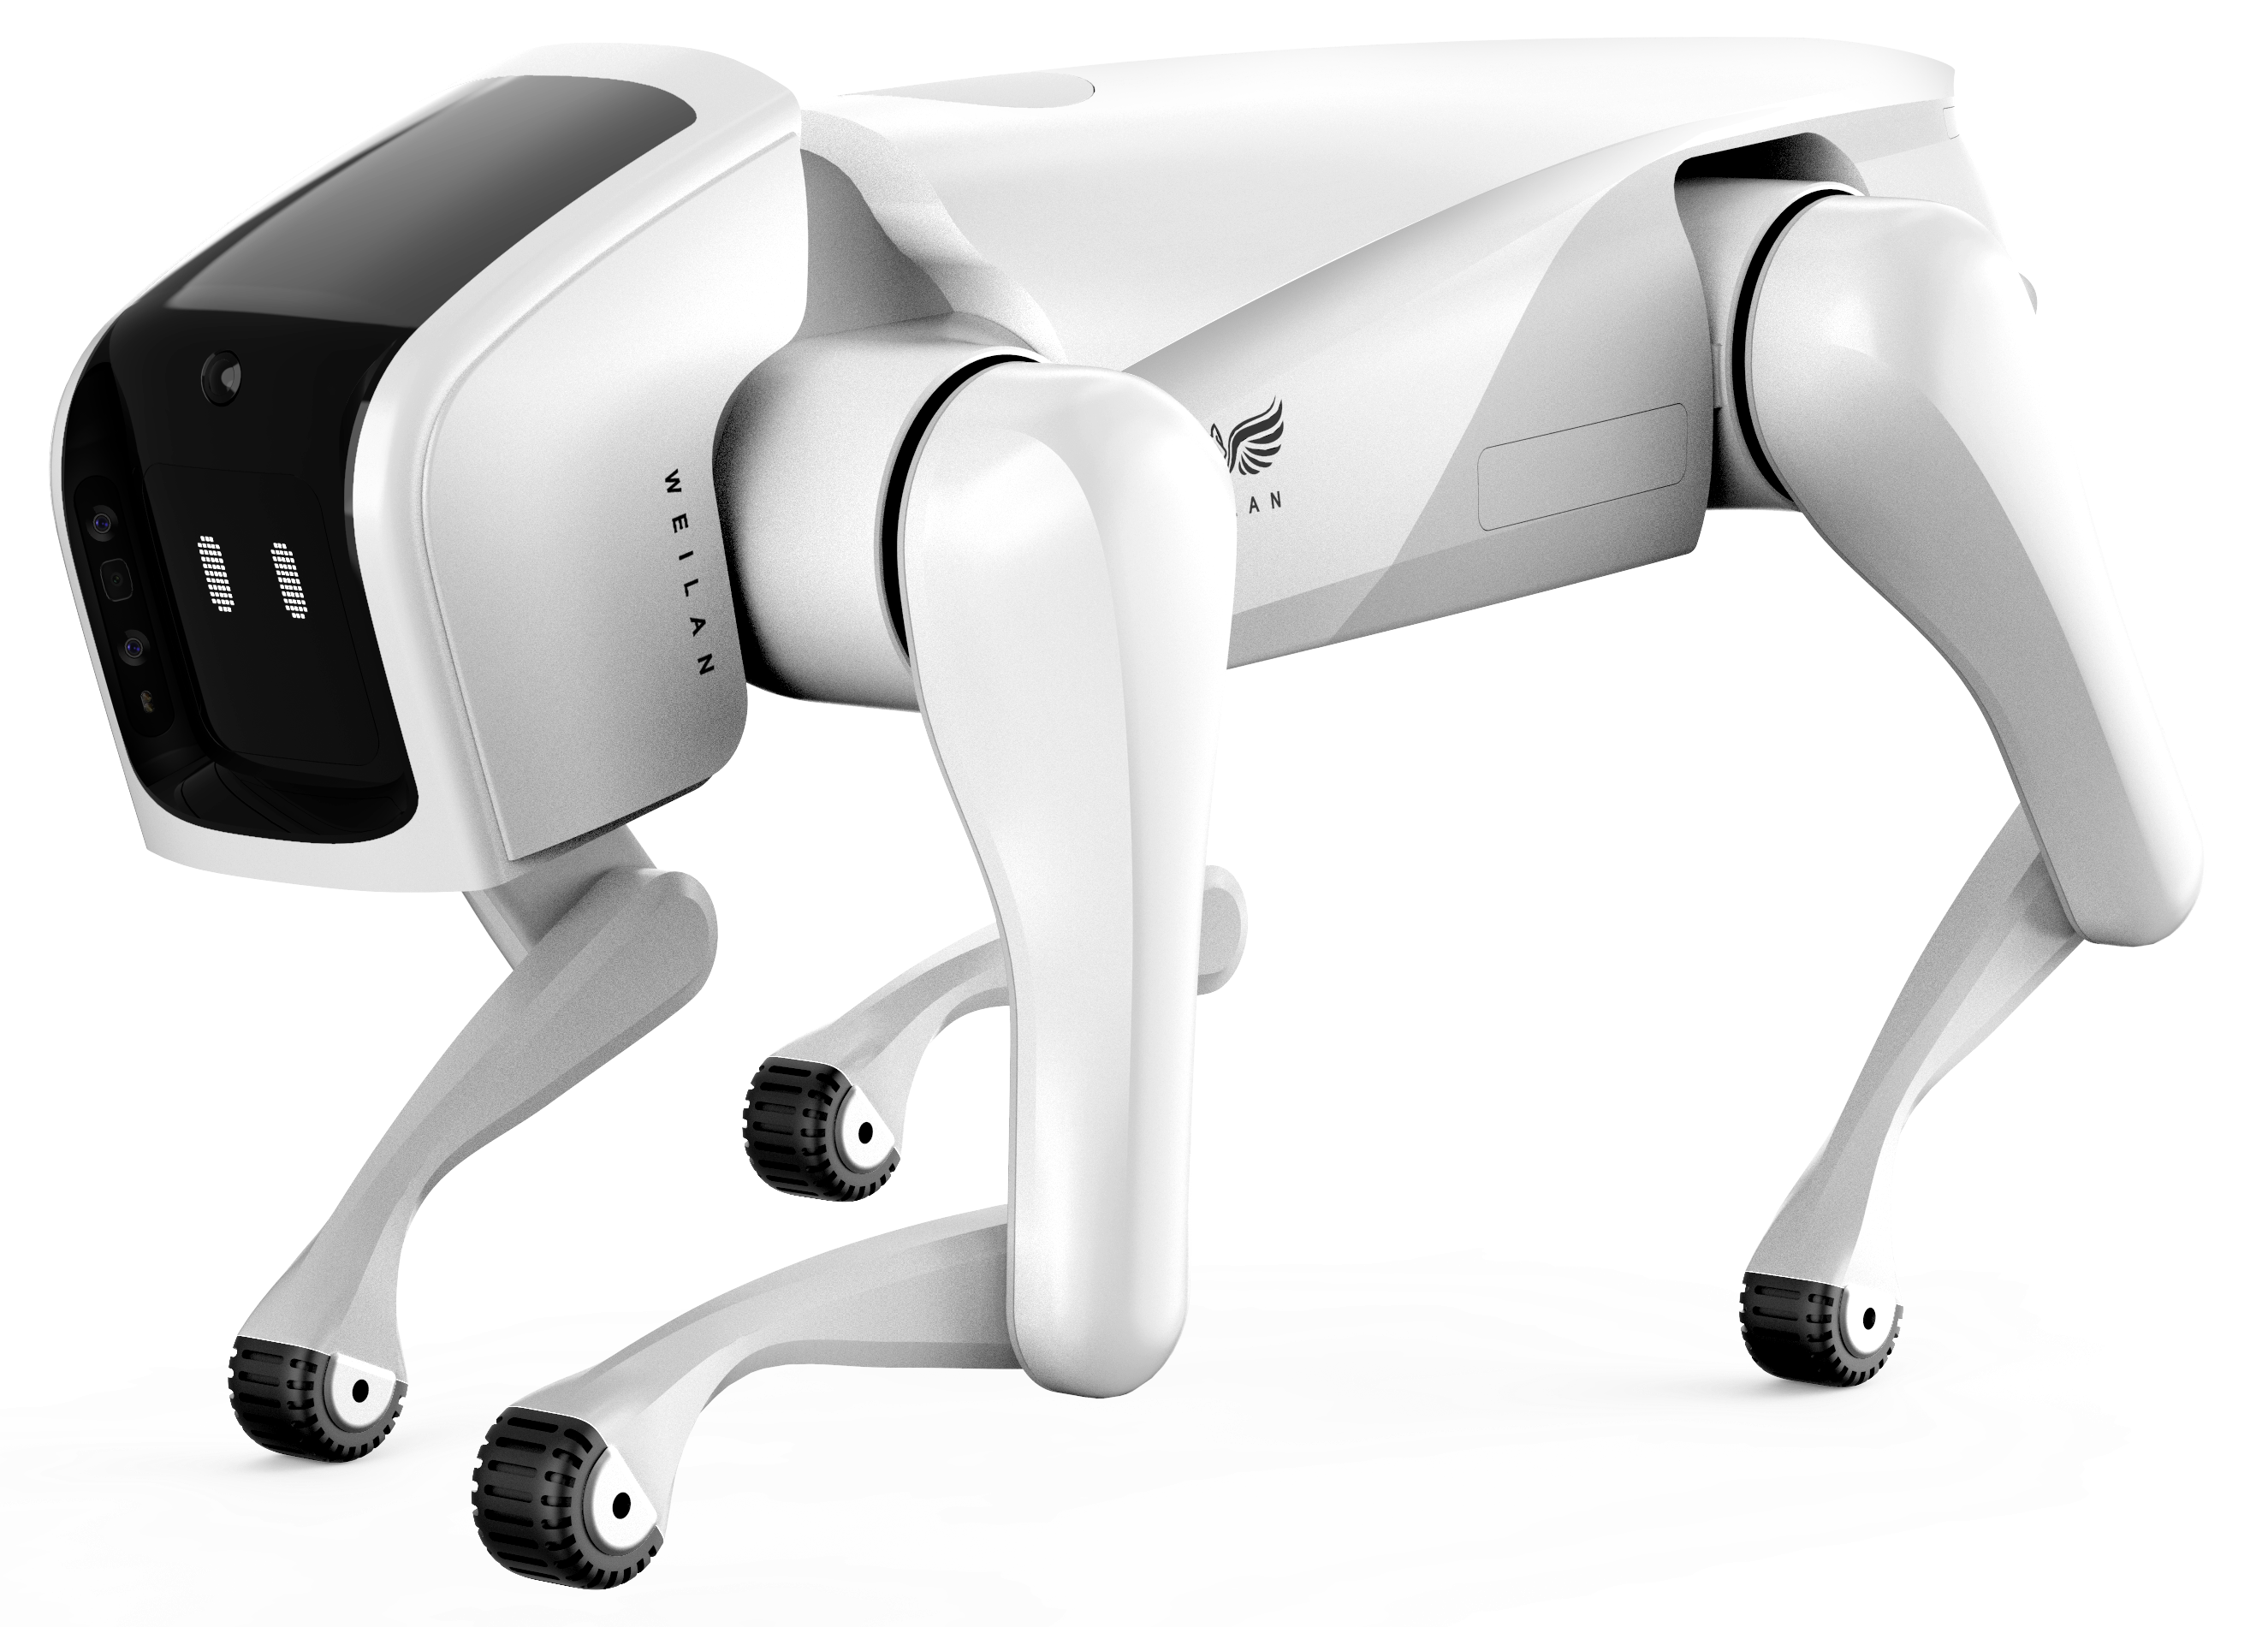 without　Robotics　that　Oz　operated　and　with　AlphaDog　C-Series　–　Robot　Remote　–　Dog　A　or　can　be　Control　Autonomously